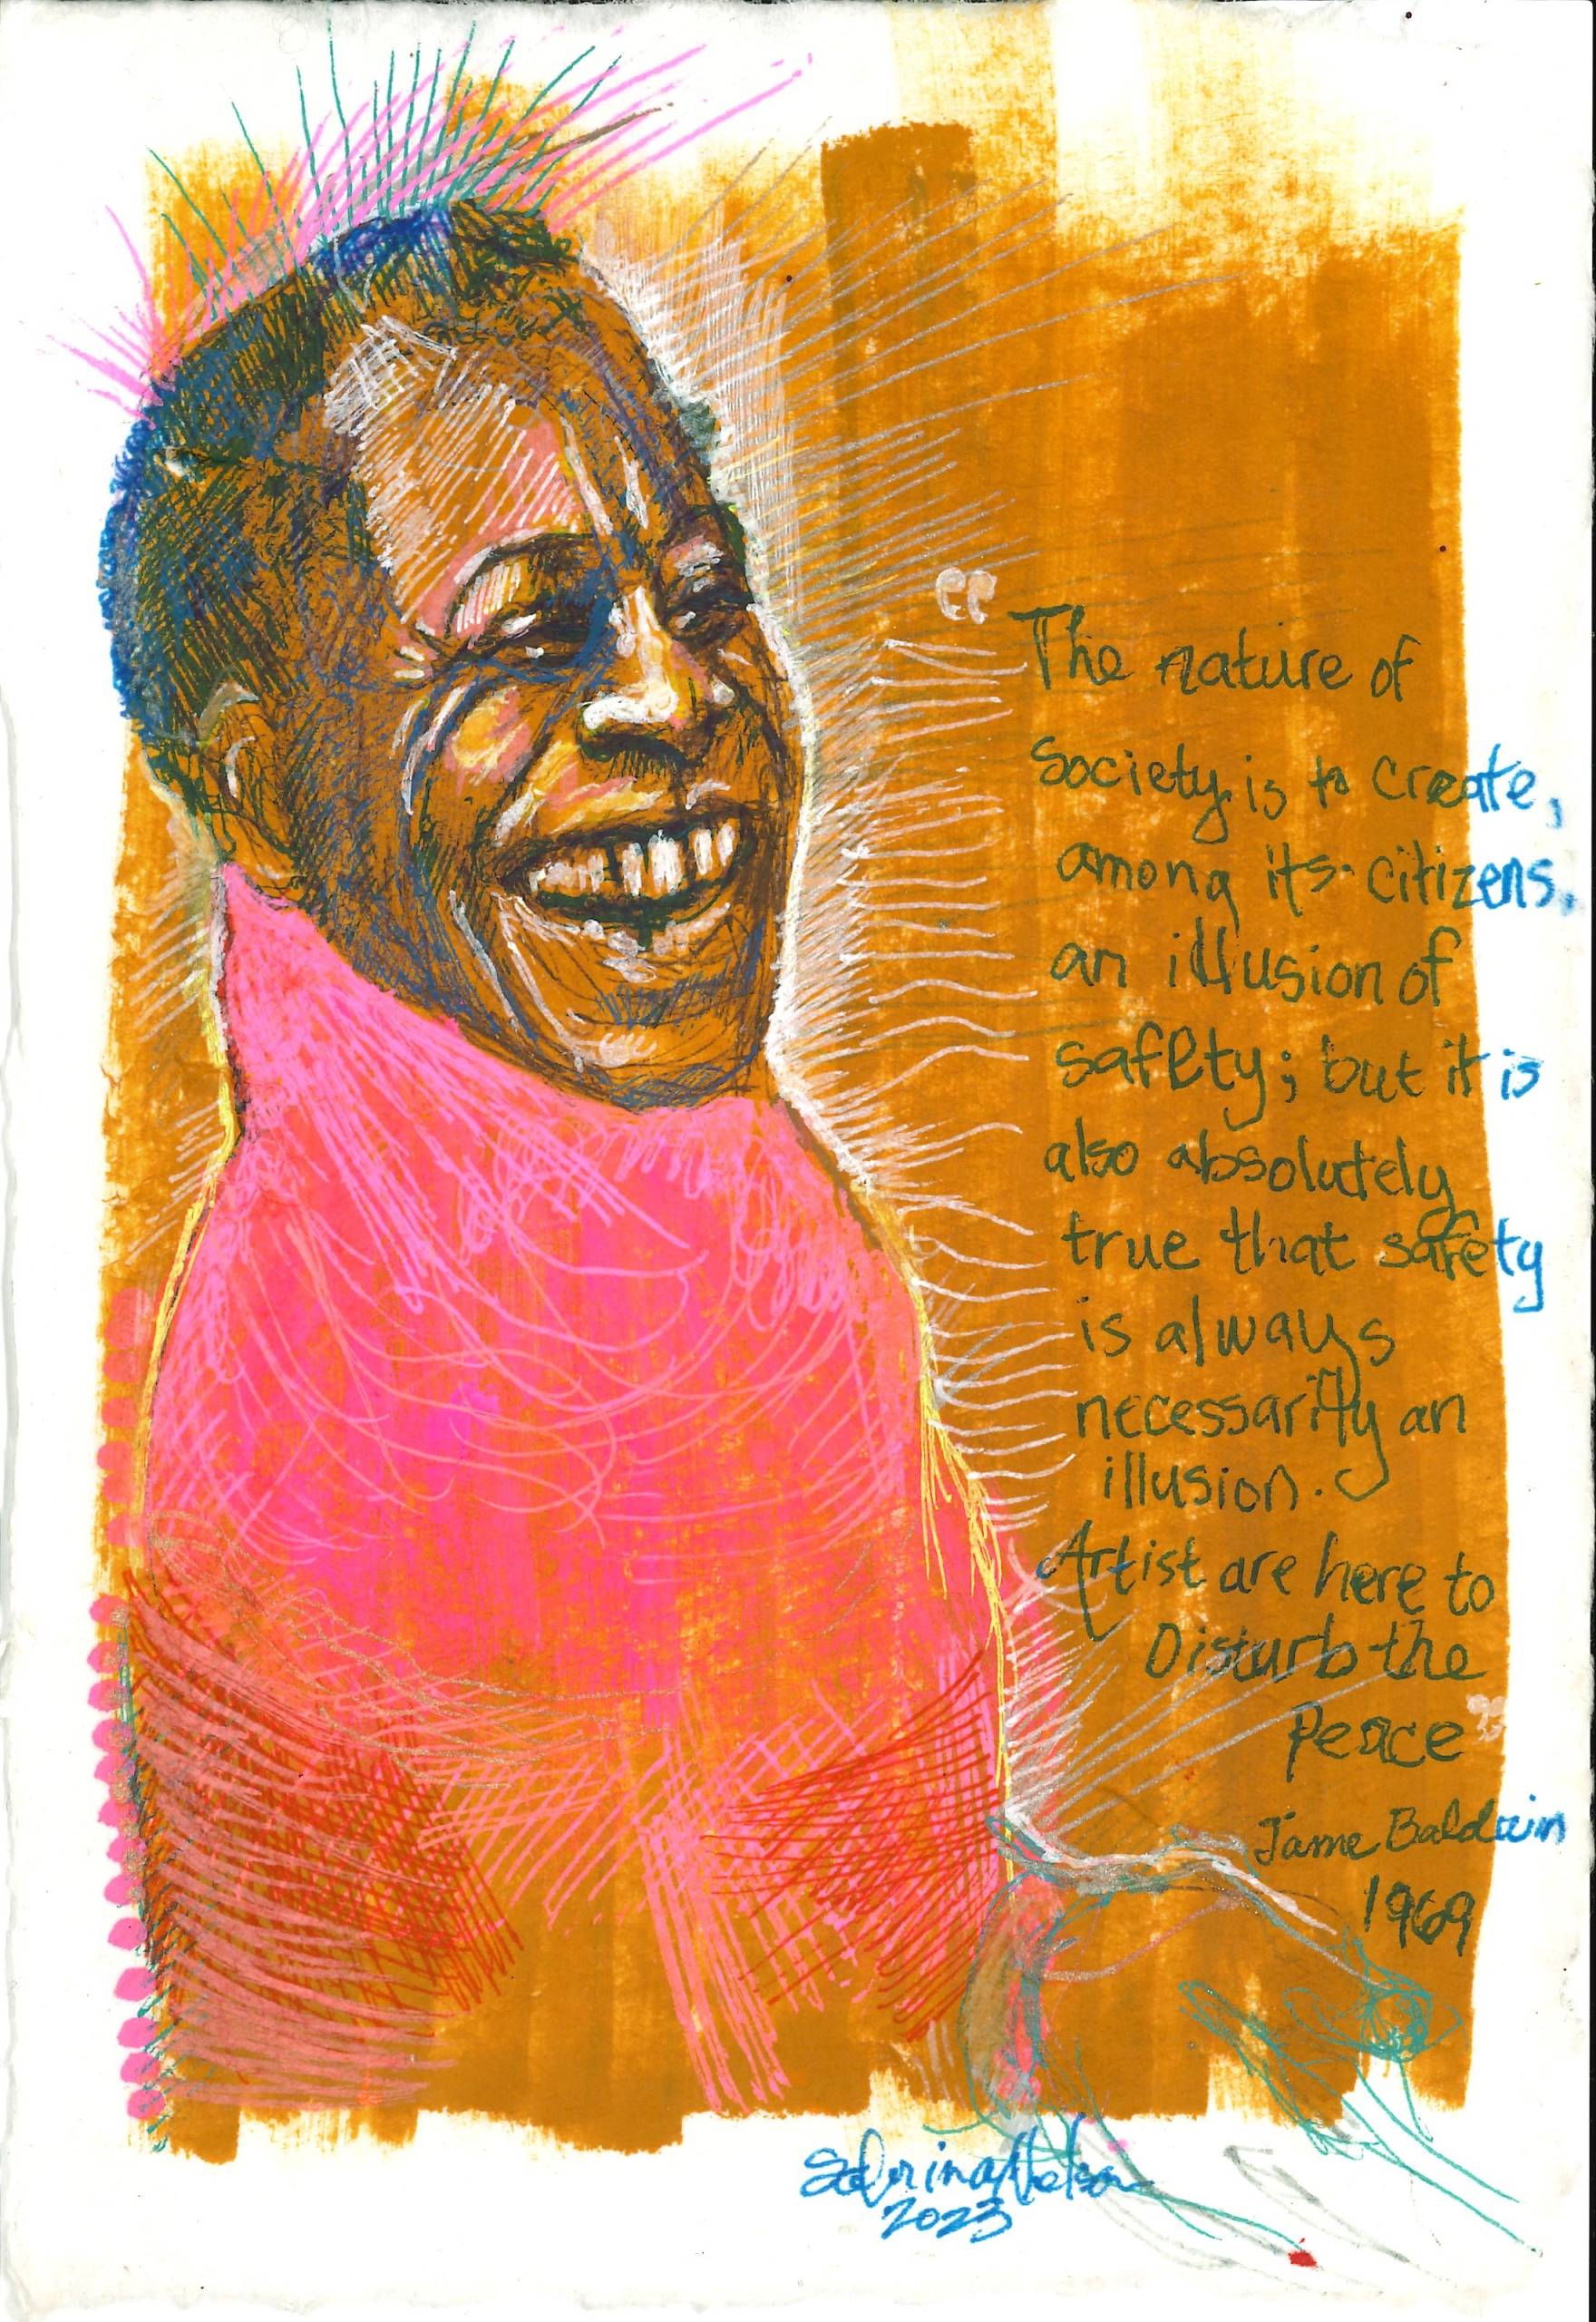 An image of James Baldwin's radiant smile and some of his words of wisdom.